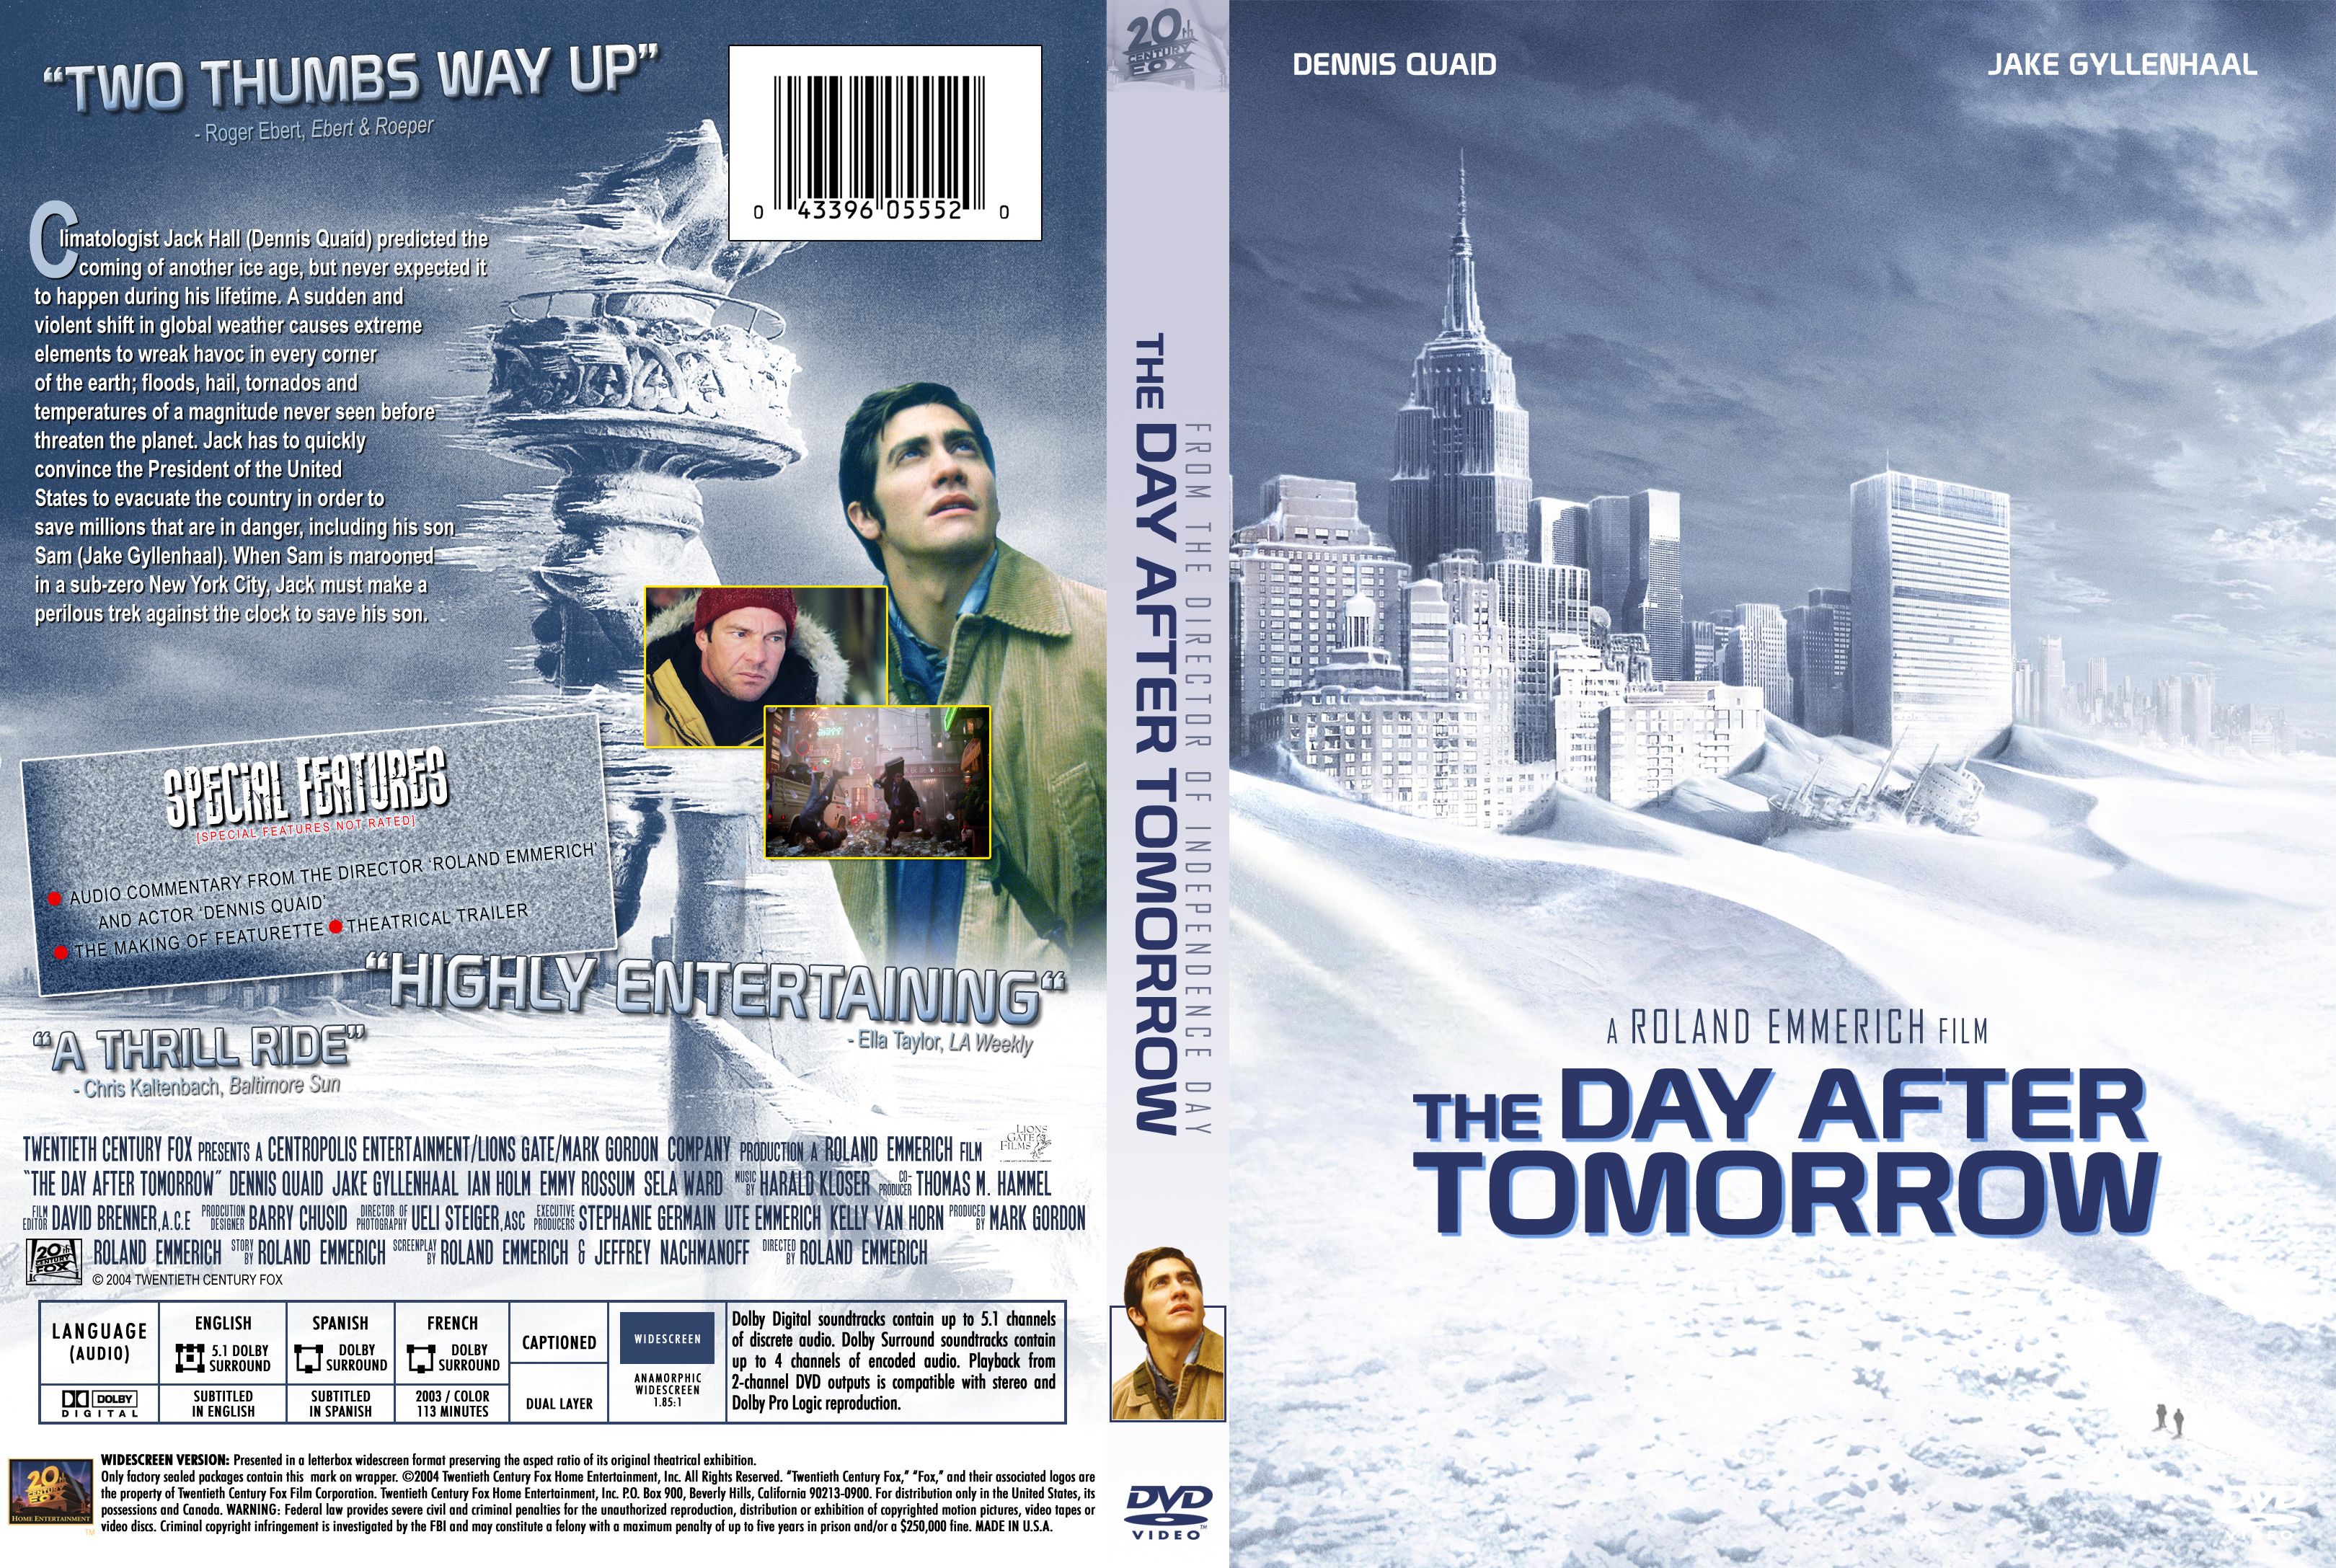 Day.after .tomorrow.v2.cb2k1 Misc Dvd.